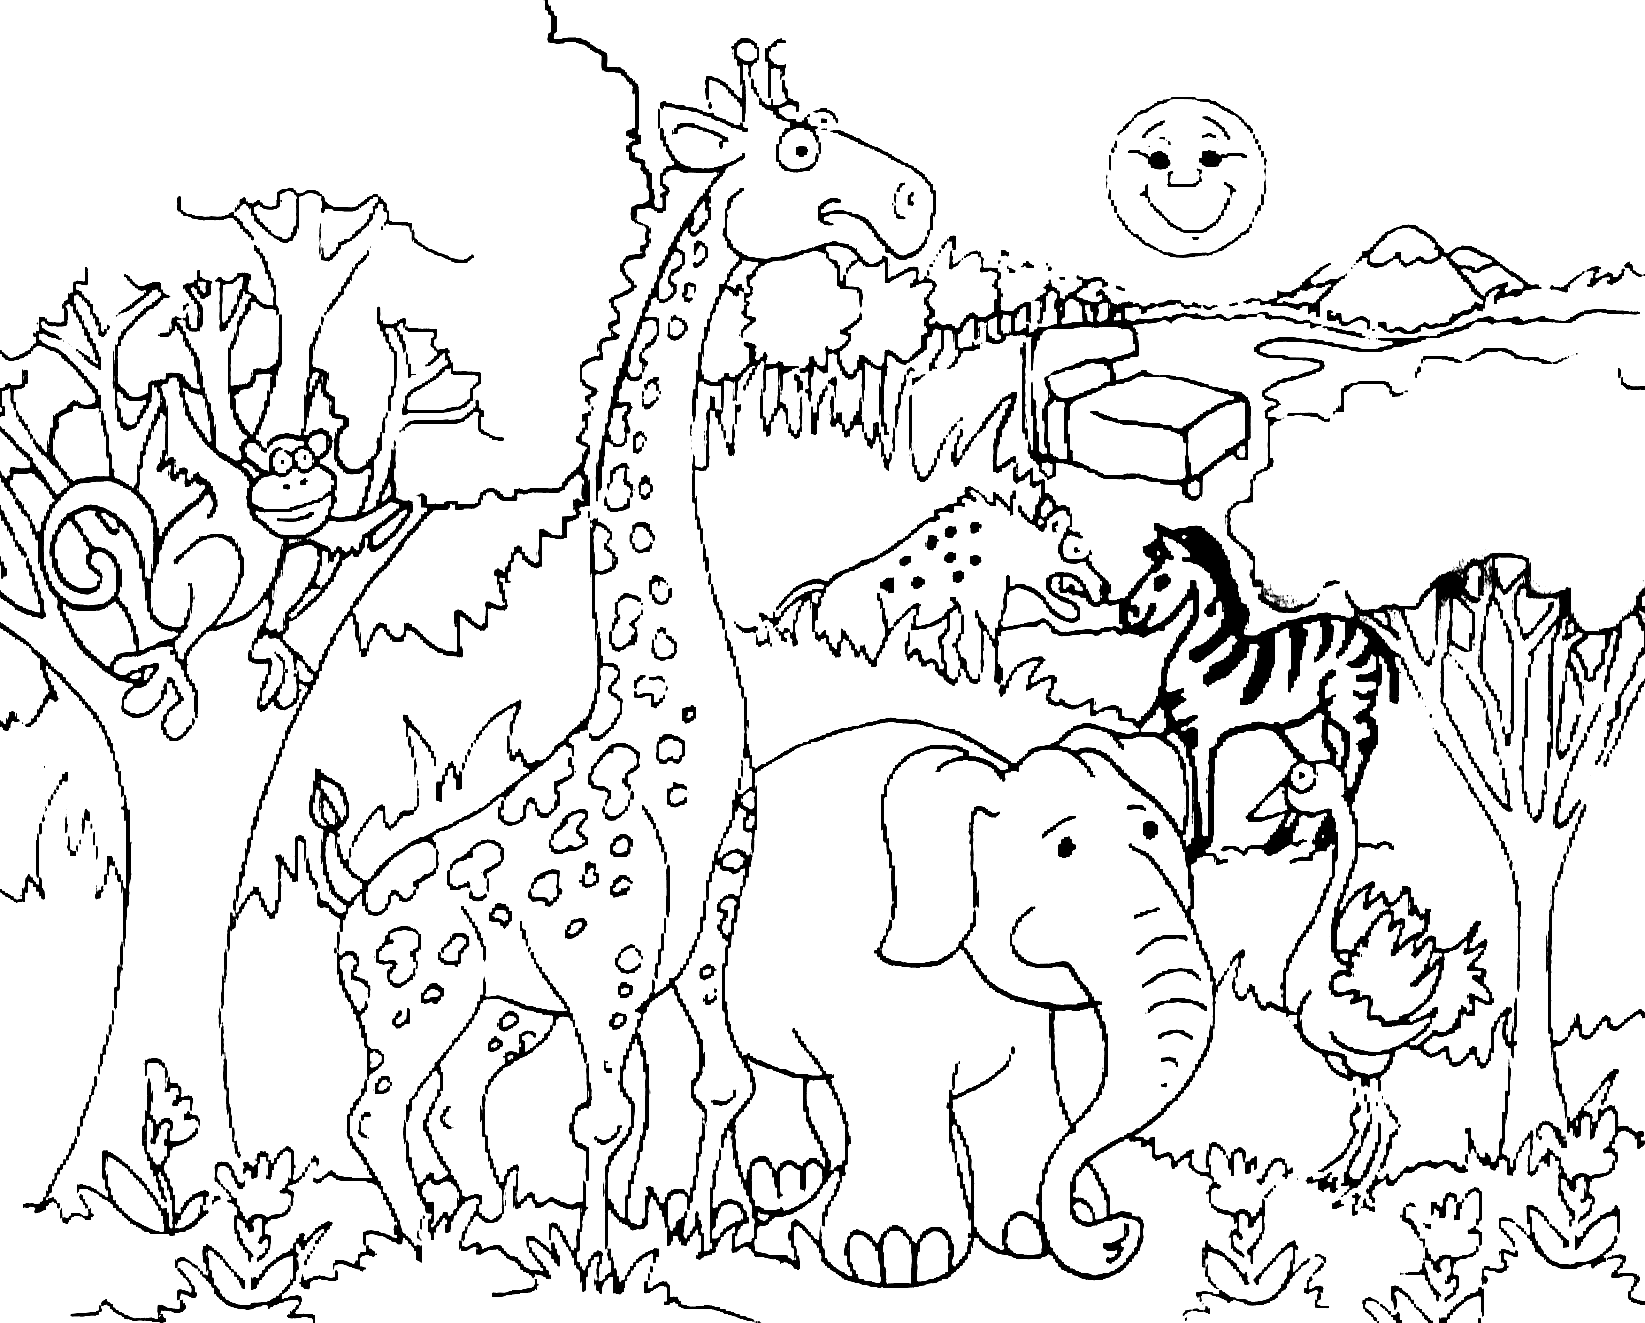 Animals in the Tropics Coloring Page